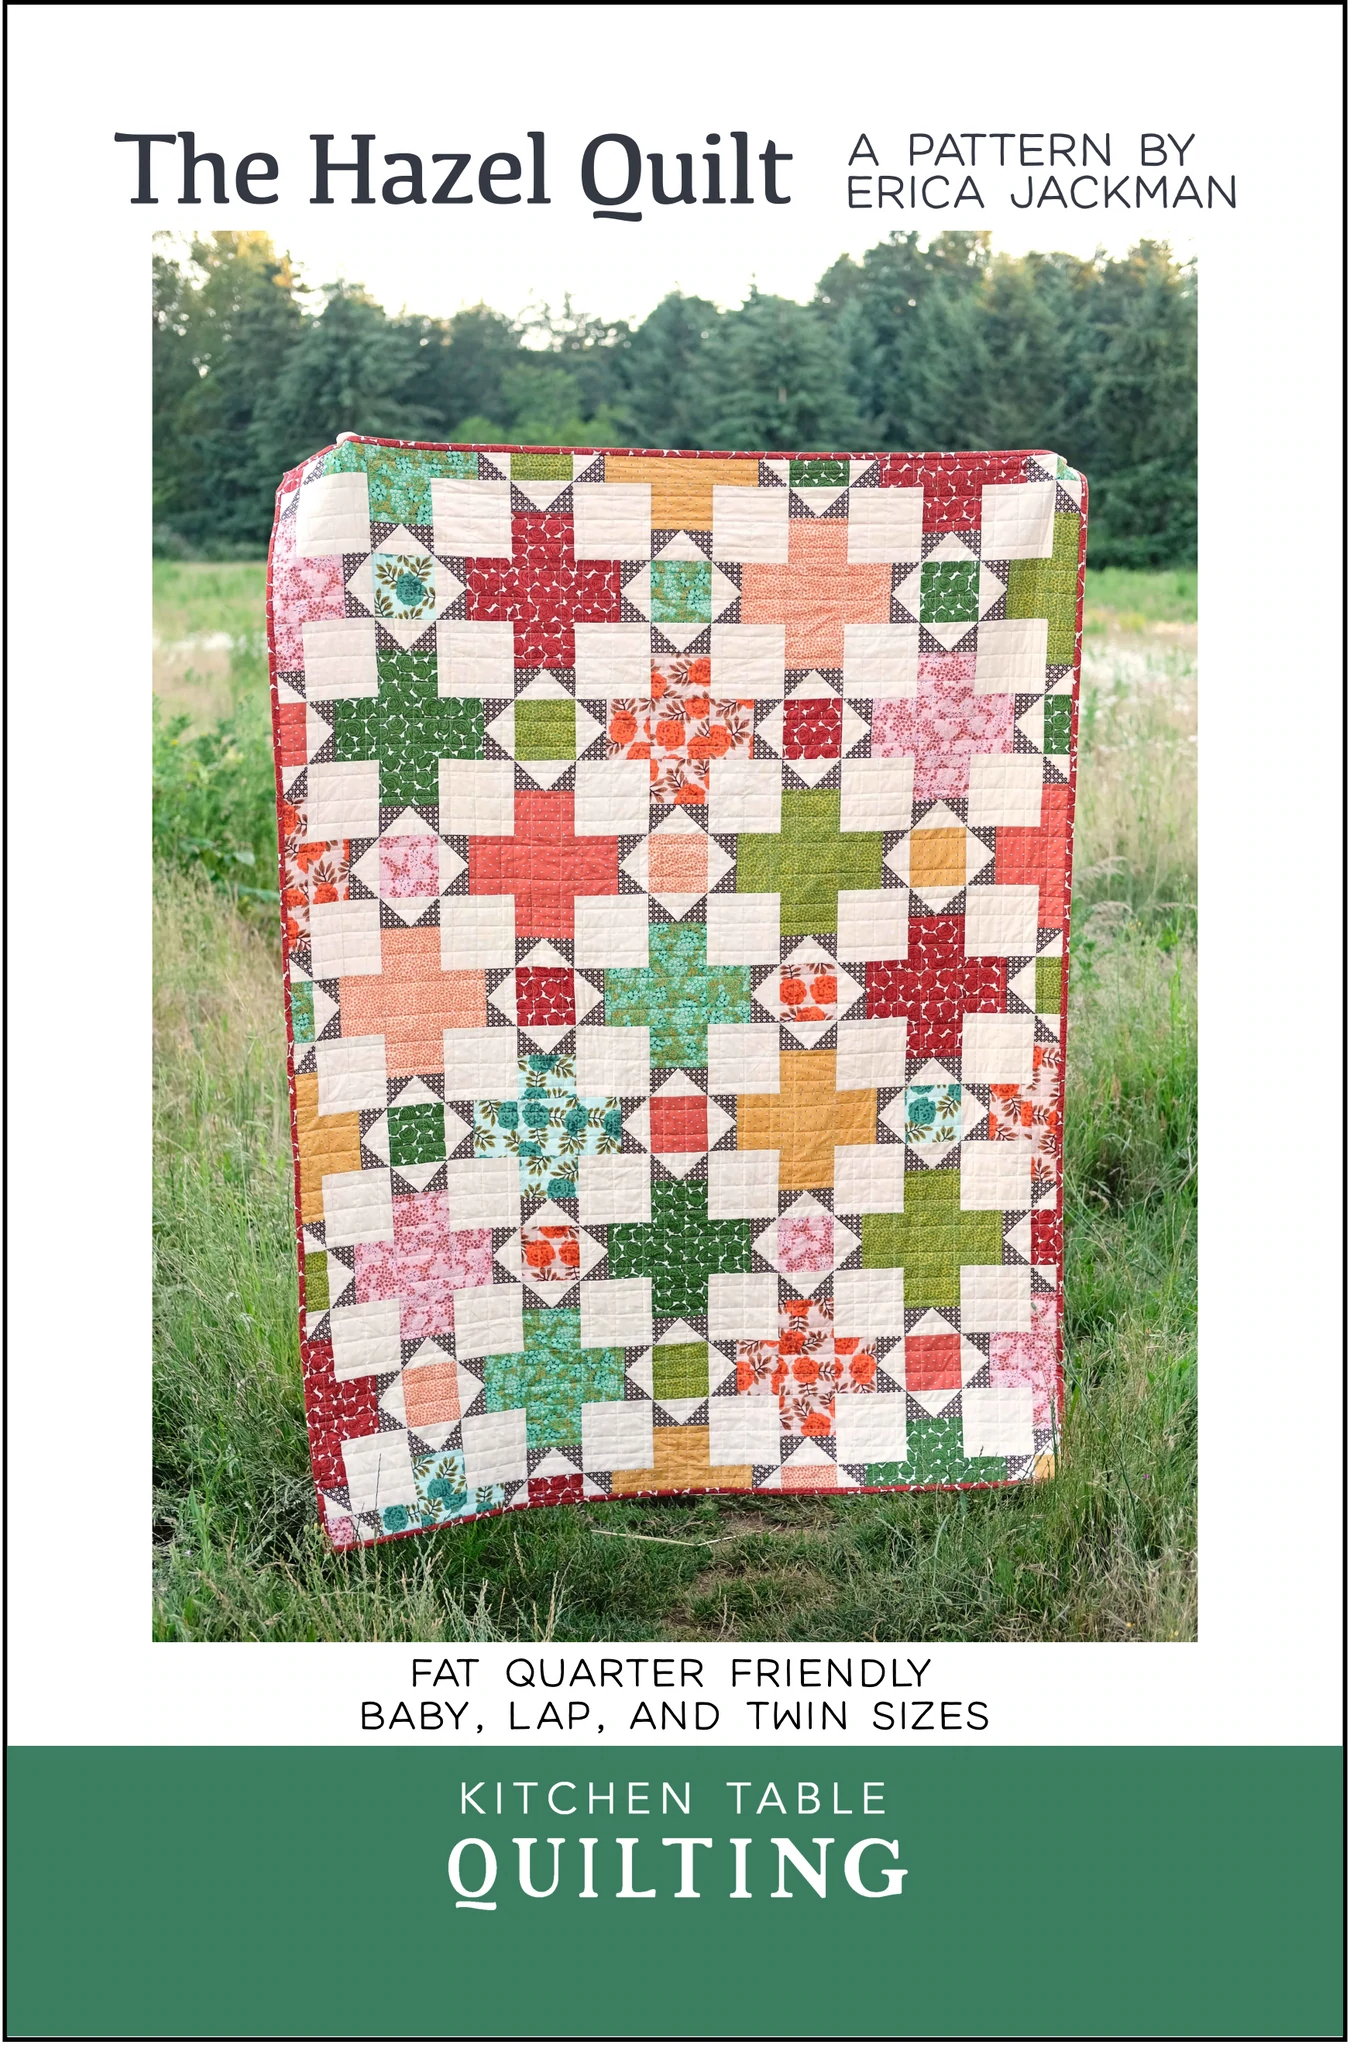 The Hazel Quilt Pattern (Kitchen Table Quilting)